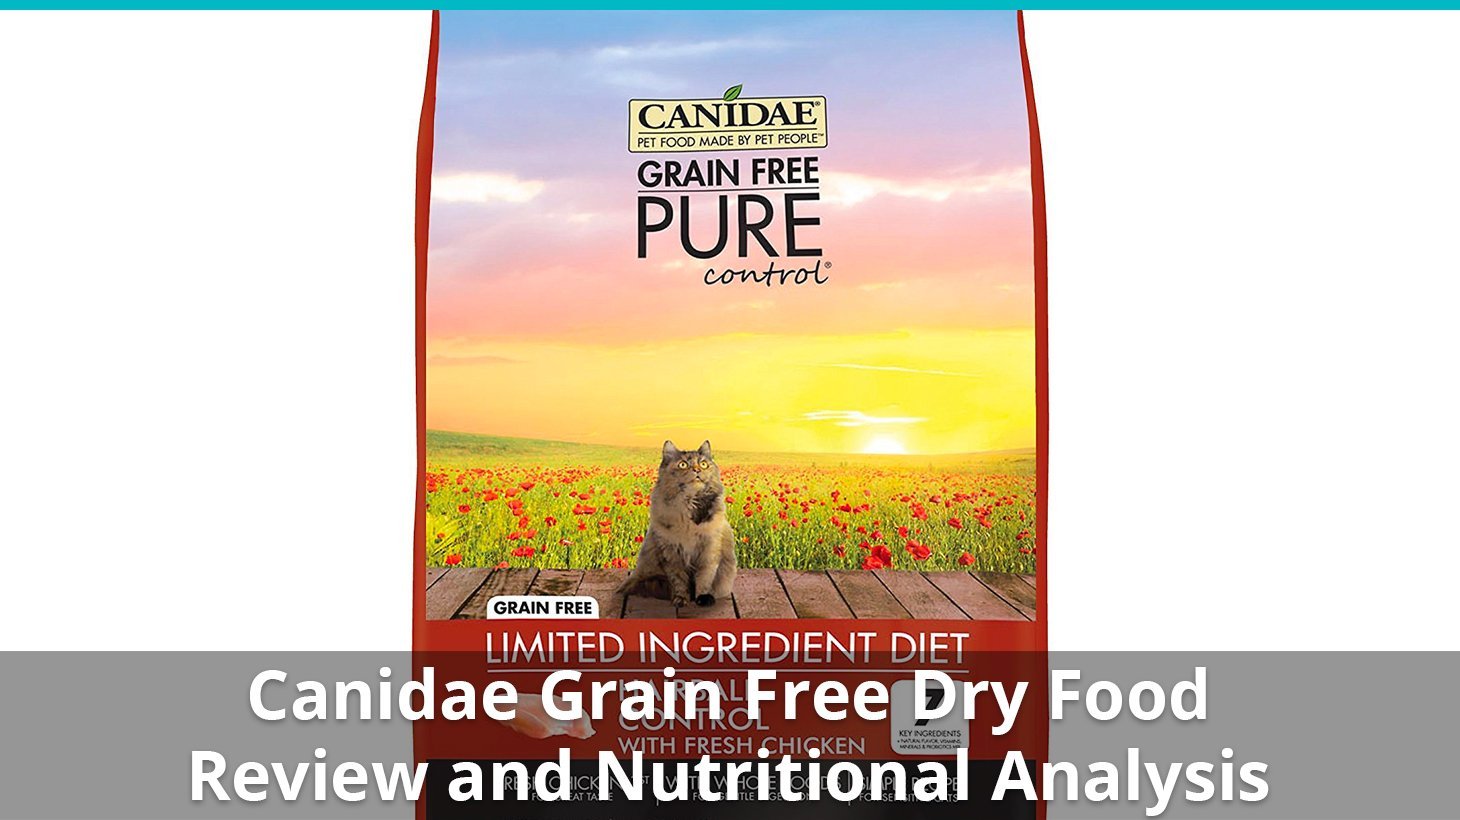 Canidae Grain Free Cat Food (Dry) Review And Analysis